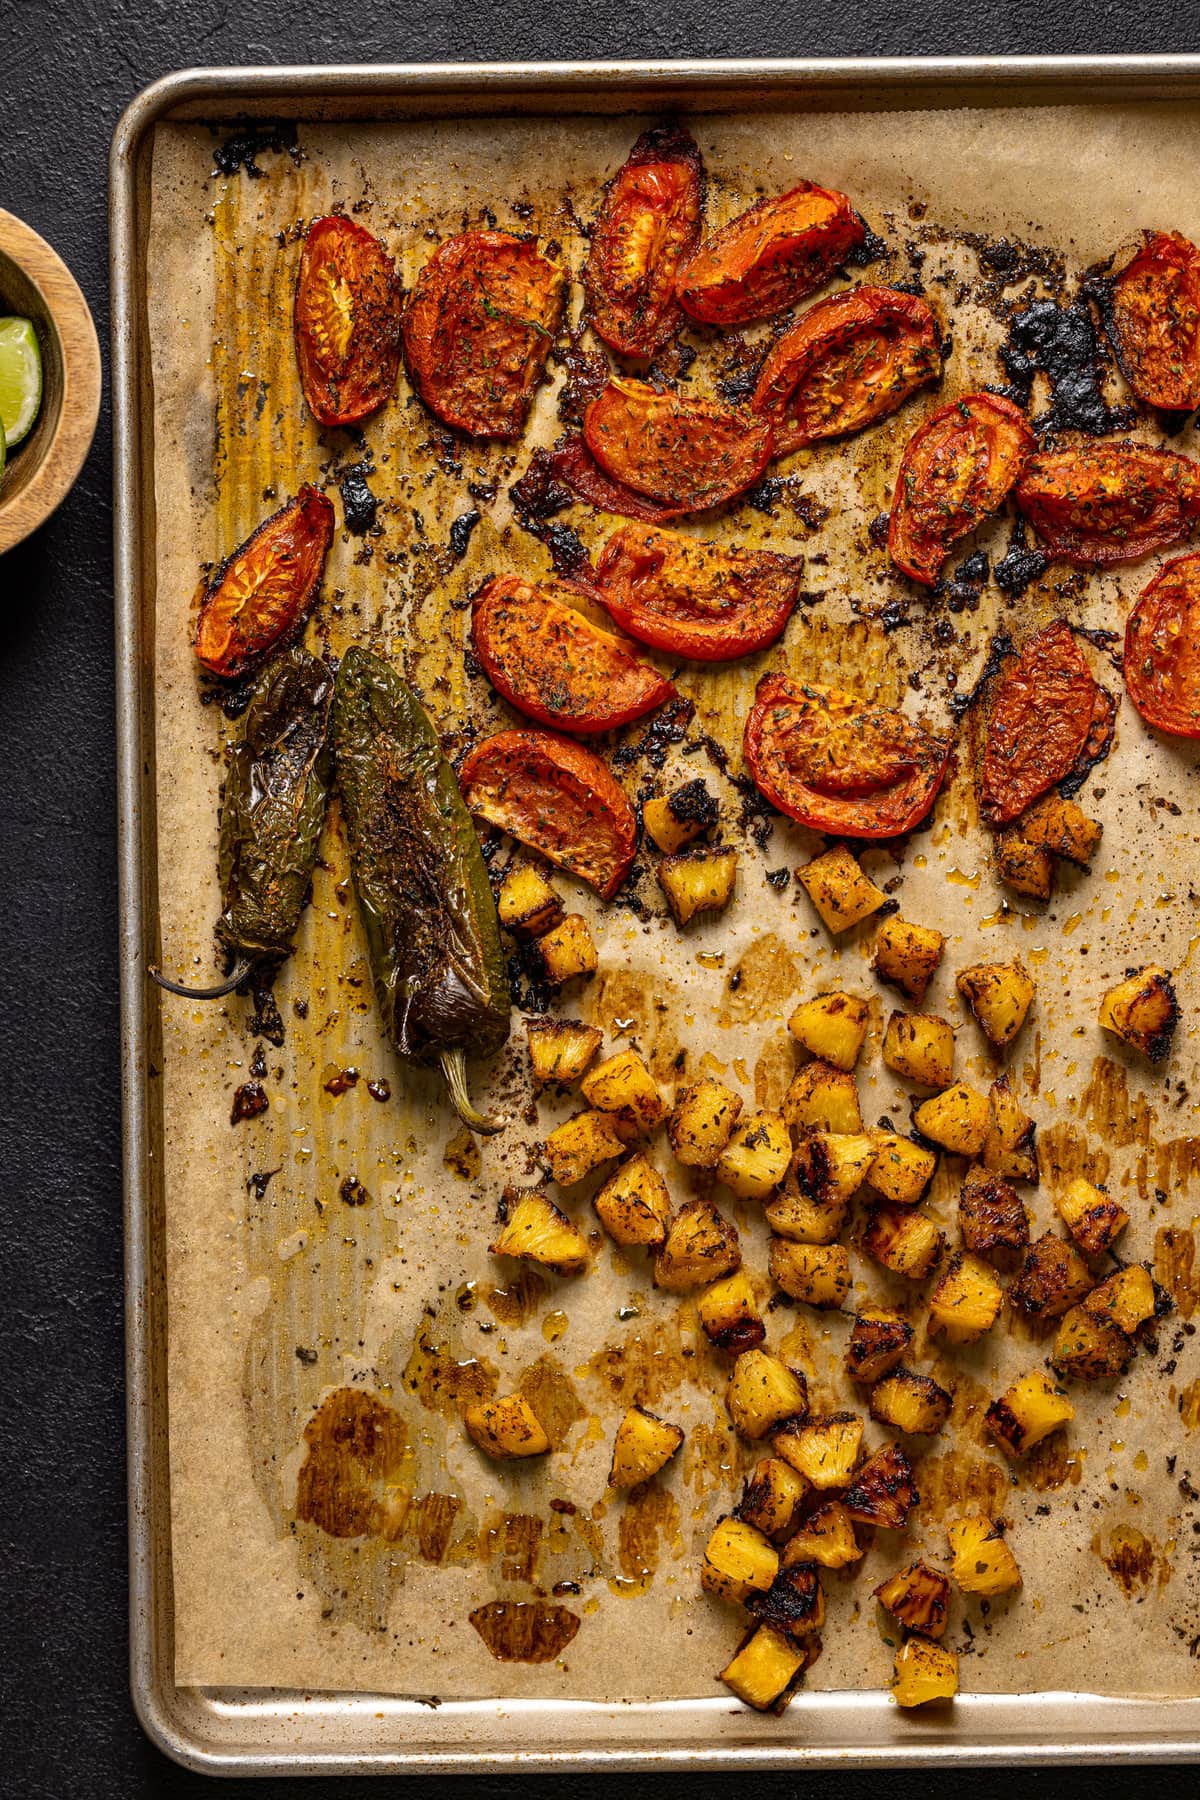 Sheet pan of roasted produce including peppers and tomato